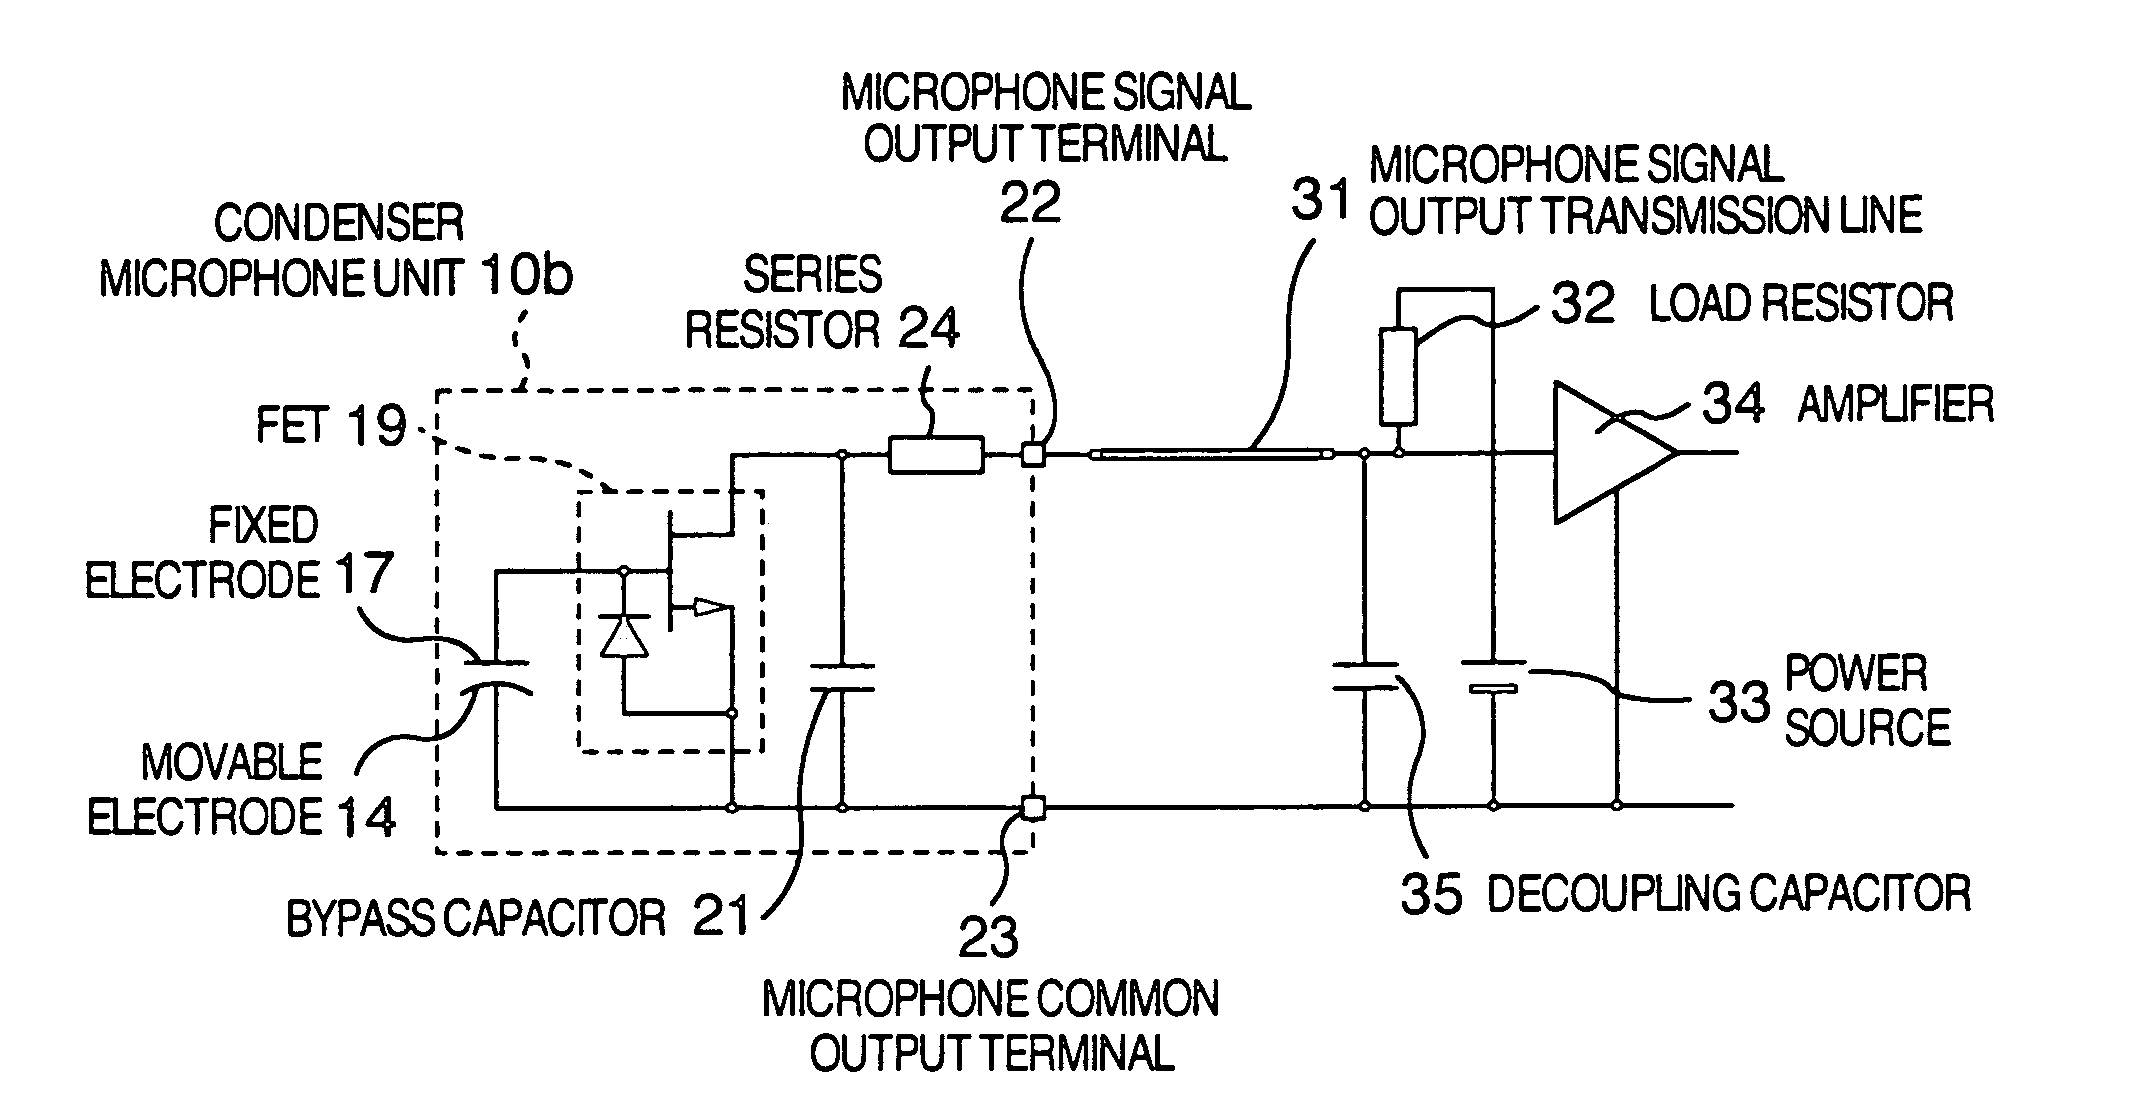 Condenser microphone apparatus and its connecting apparatus